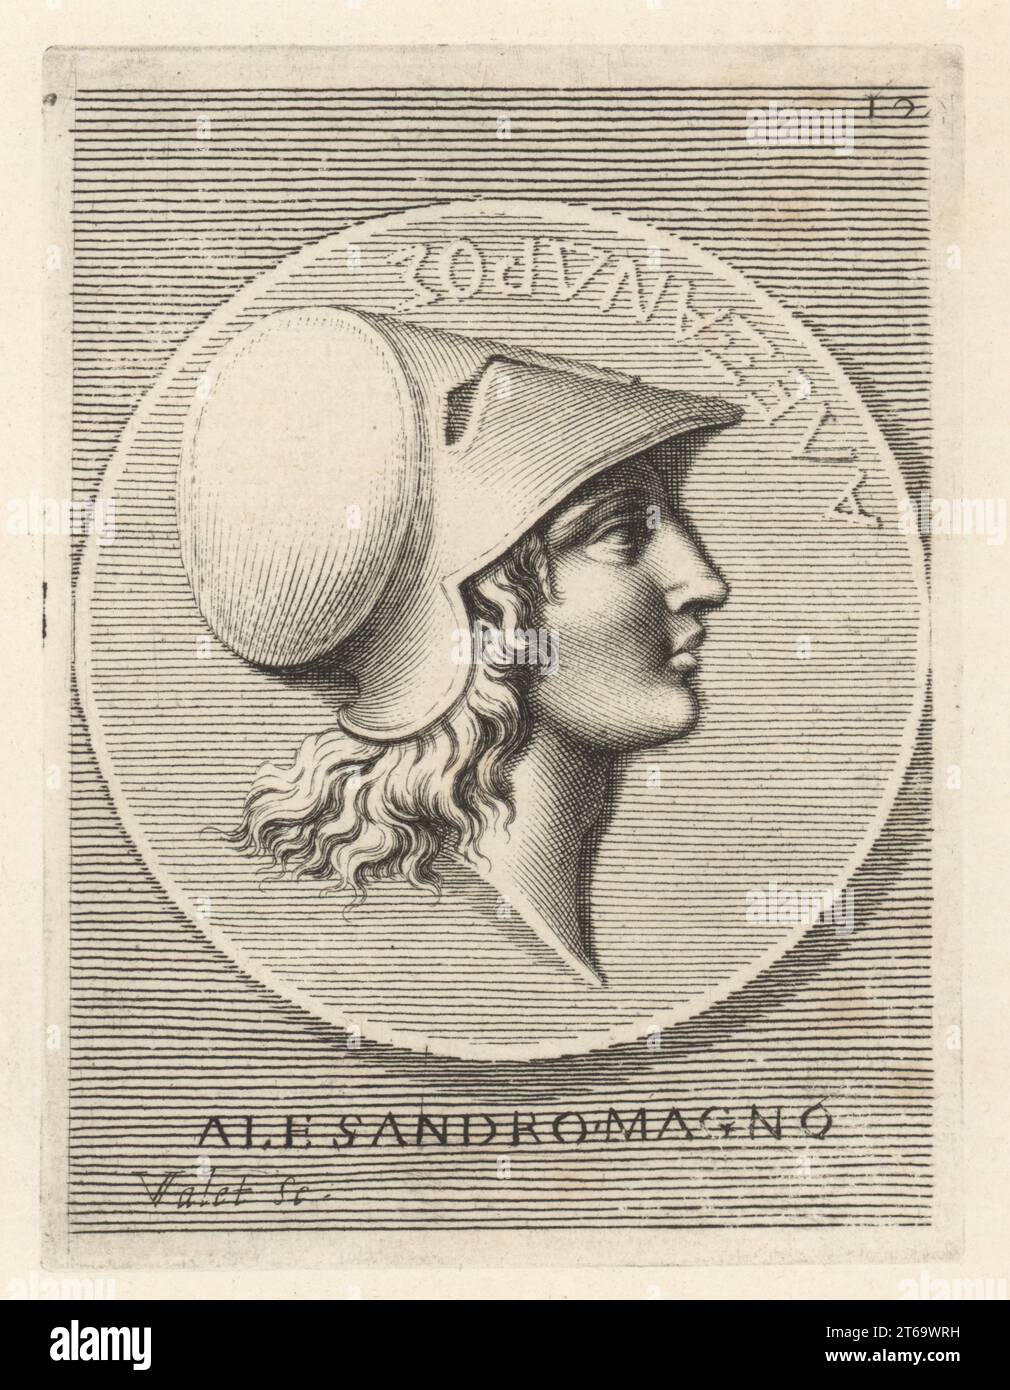 Profile portrait of Alexander the Great, Alexander III of Macedon, 356 323 BC, king of the ancient Greek kingdom of Macedon. Wearing a Corinthian helmet without crest or crown. From a silver coin in the collection of Gio. Pietro Bellori. Alessandro Magno. Copperplate engraving by Guillaume Vallet after Giovanni Angelo Canini from Iconografia, cioe disegni d'imagini de famosissimi monarchi, regi, filososi, poeti ed oratori dell' Antichita, Drawings of images of famous monarchs, kings, philosophers, poets and orators of Antiquity, Ignatio deLazari, Rome, 1699. Stock Photo